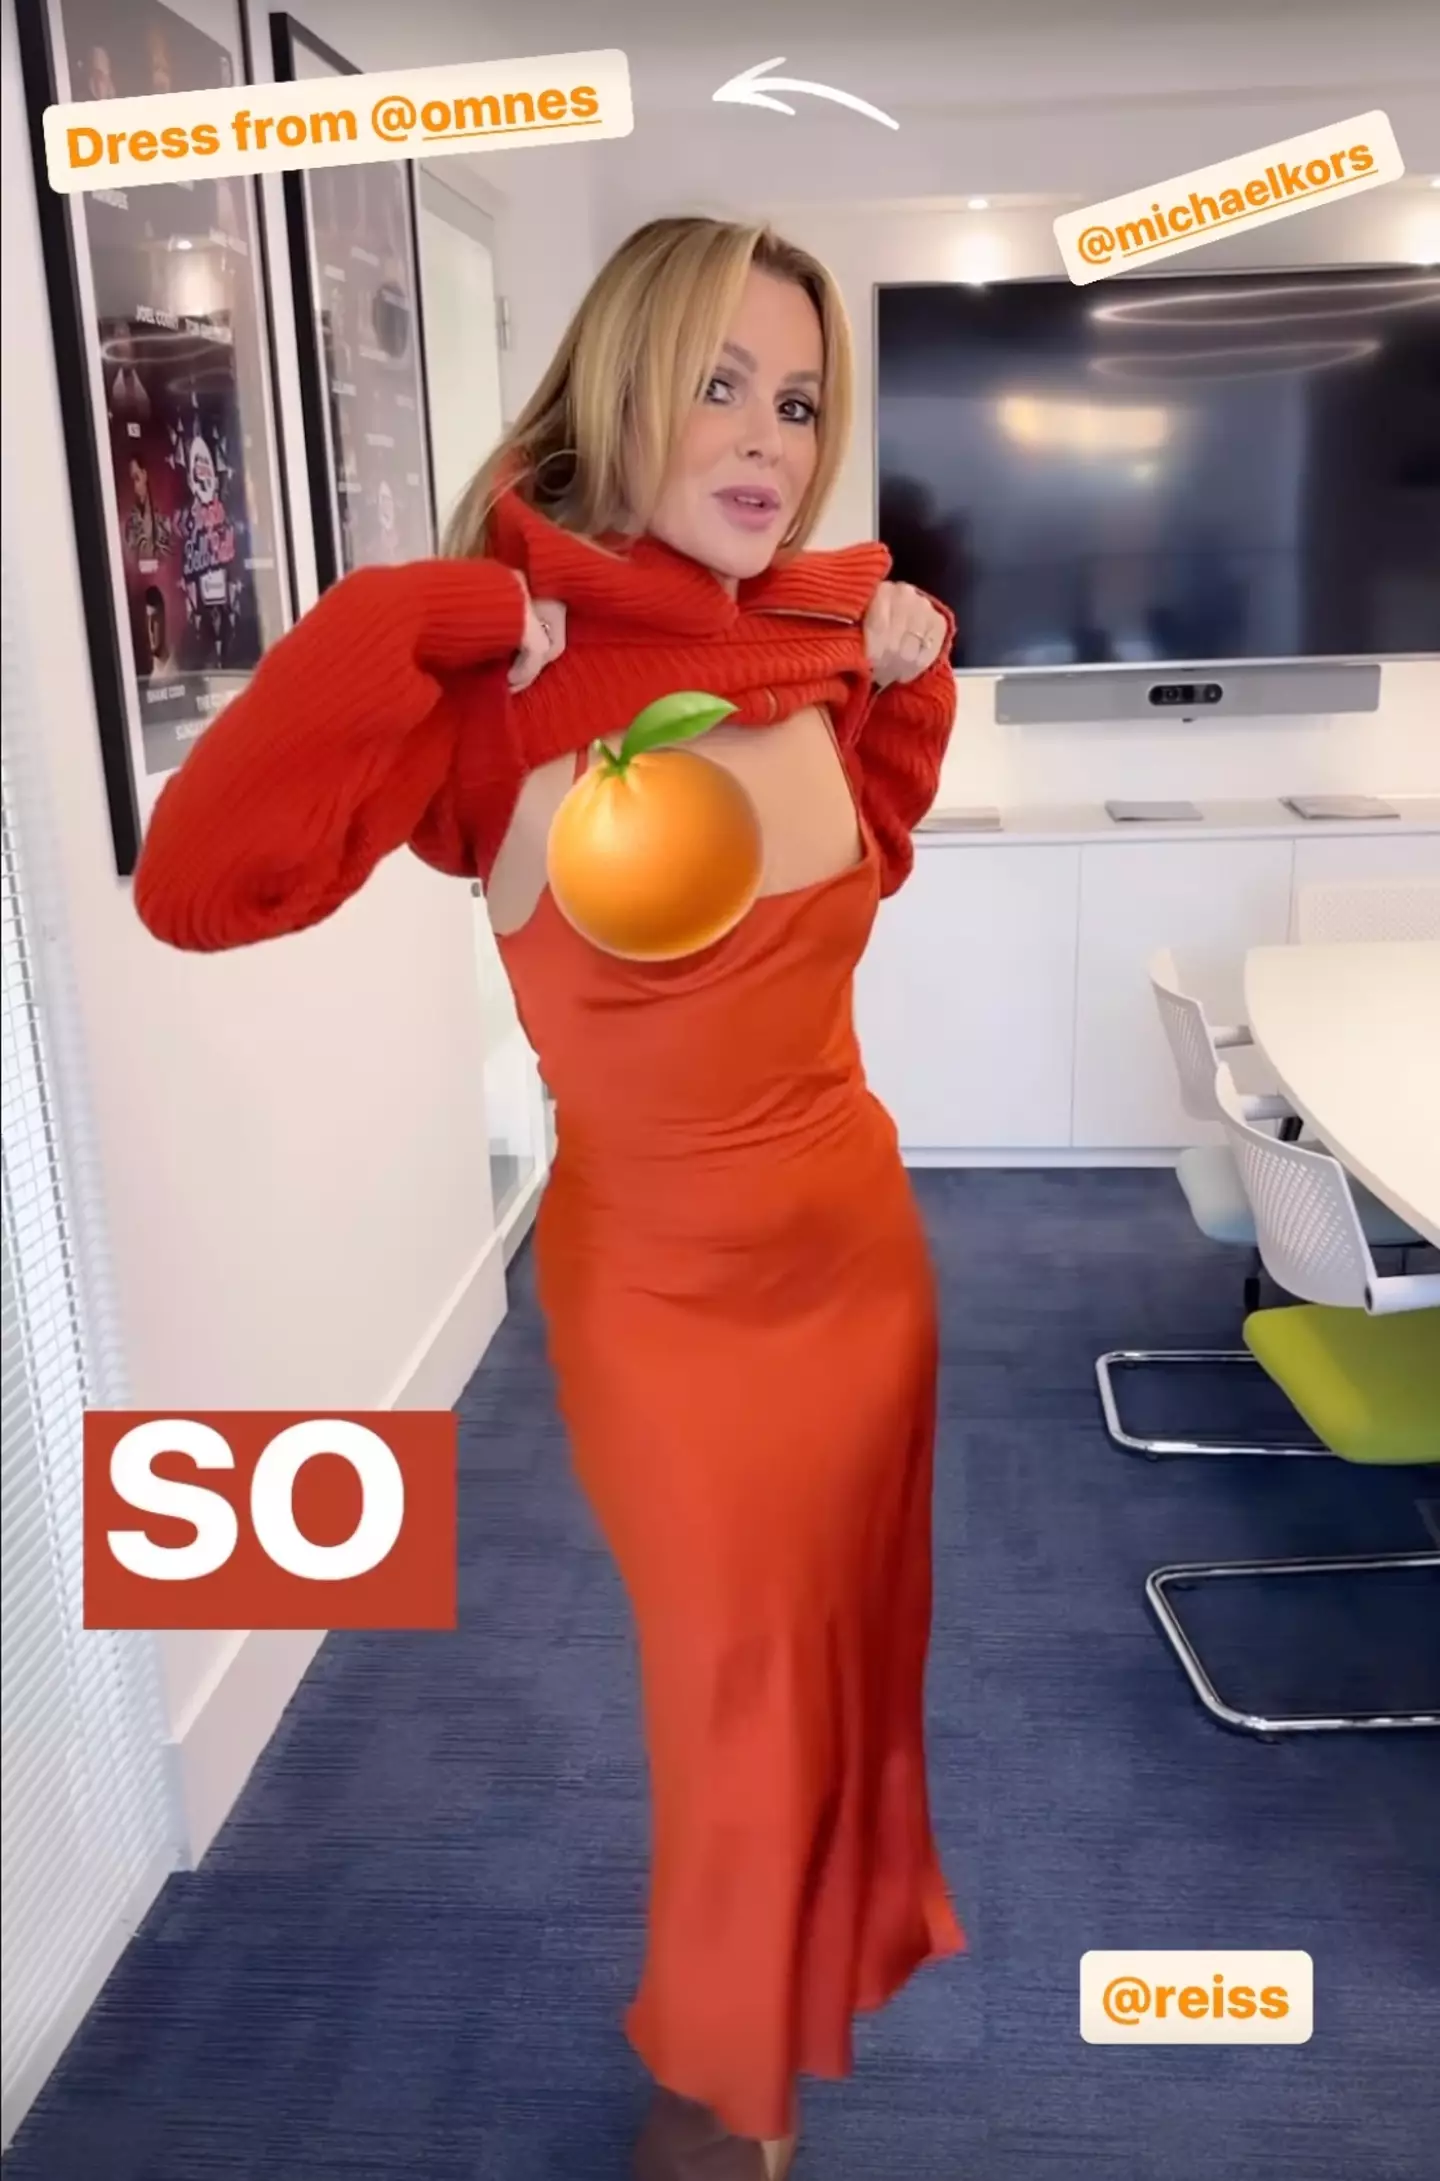 Amanda accidentally gave fans an eyeful while showing off her orange look.